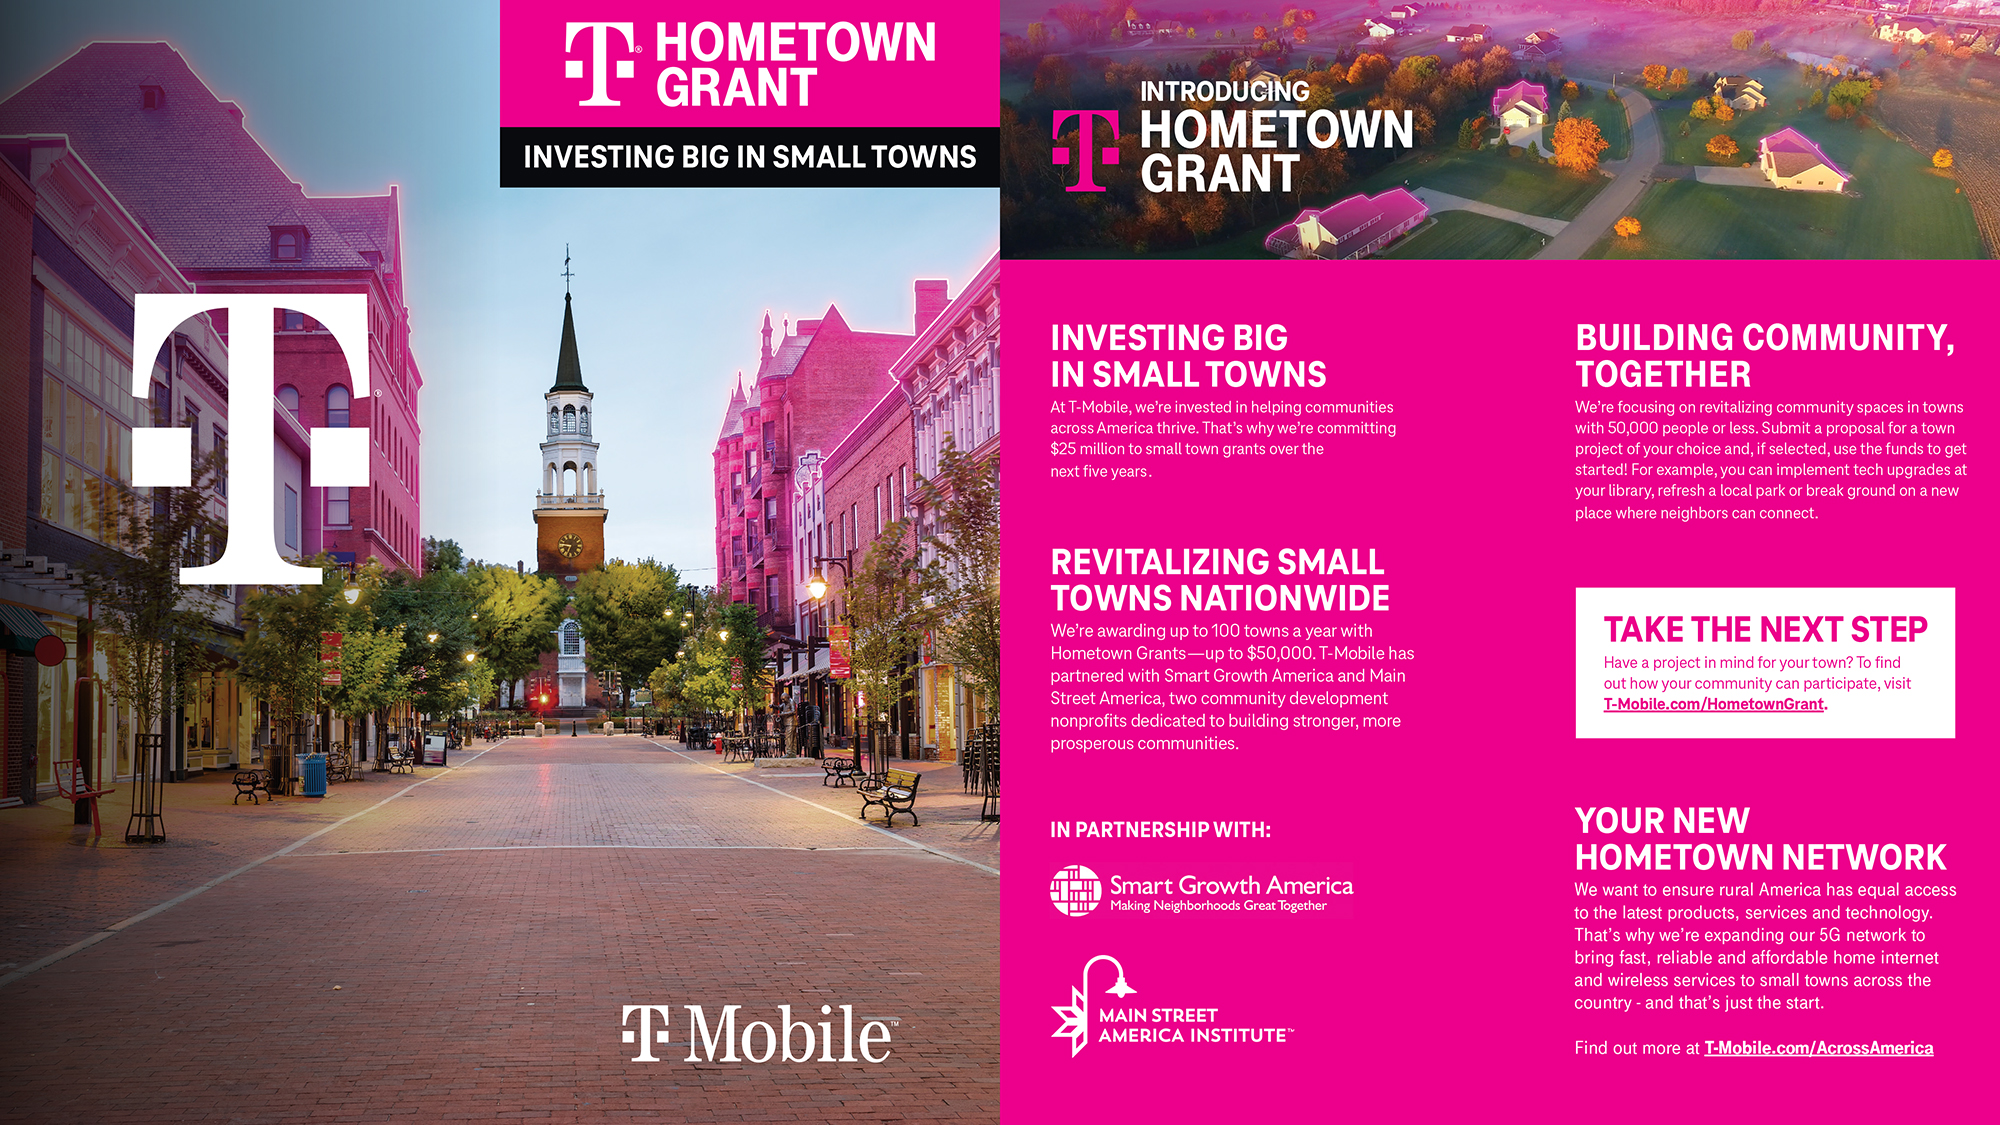 SGA is partnering with T-Mobile to assist rural communities